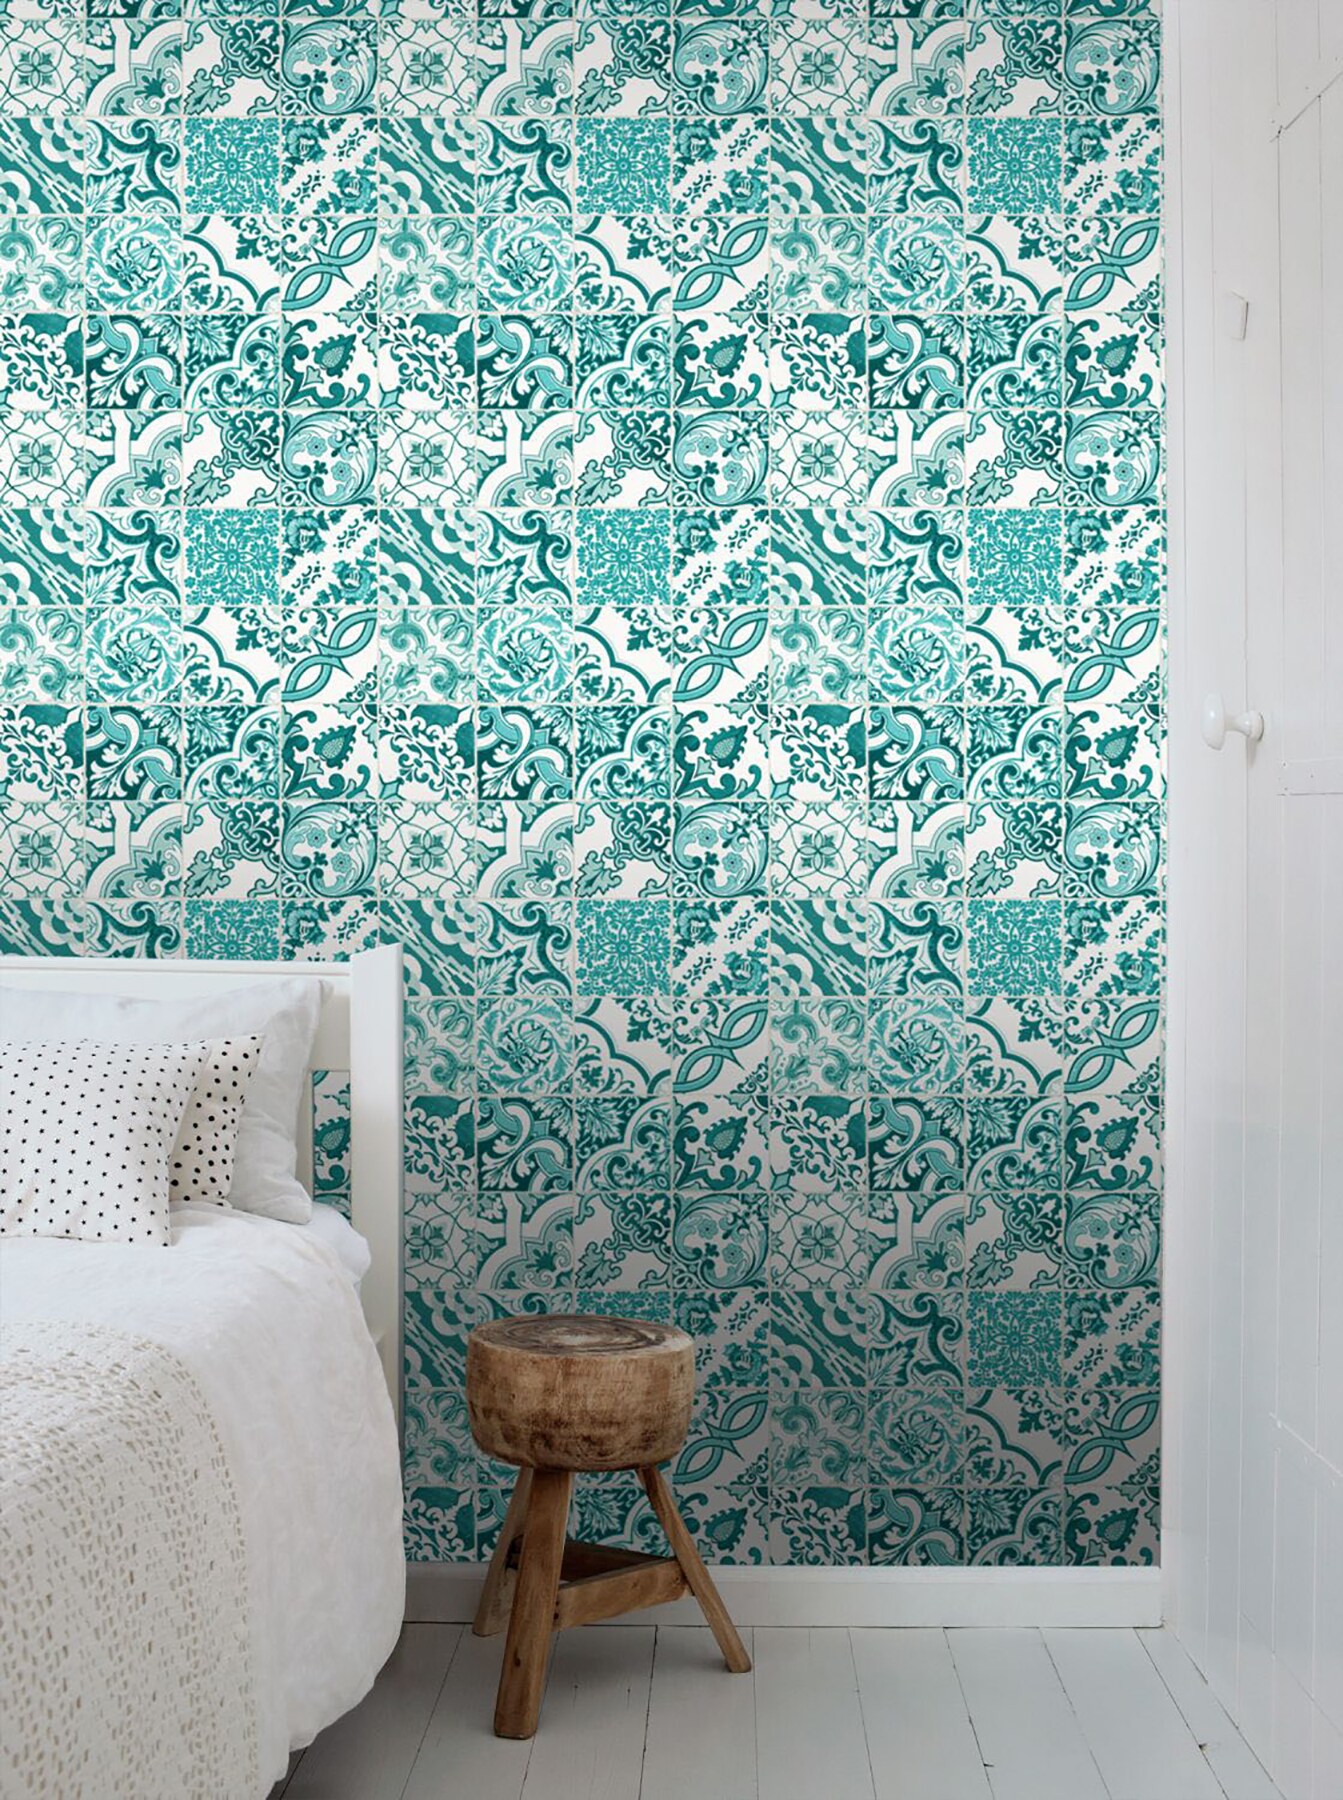 ESTA Home 56.4-sq ft Turquoise Non-woven Tile Unpasted Wallpaper at ...